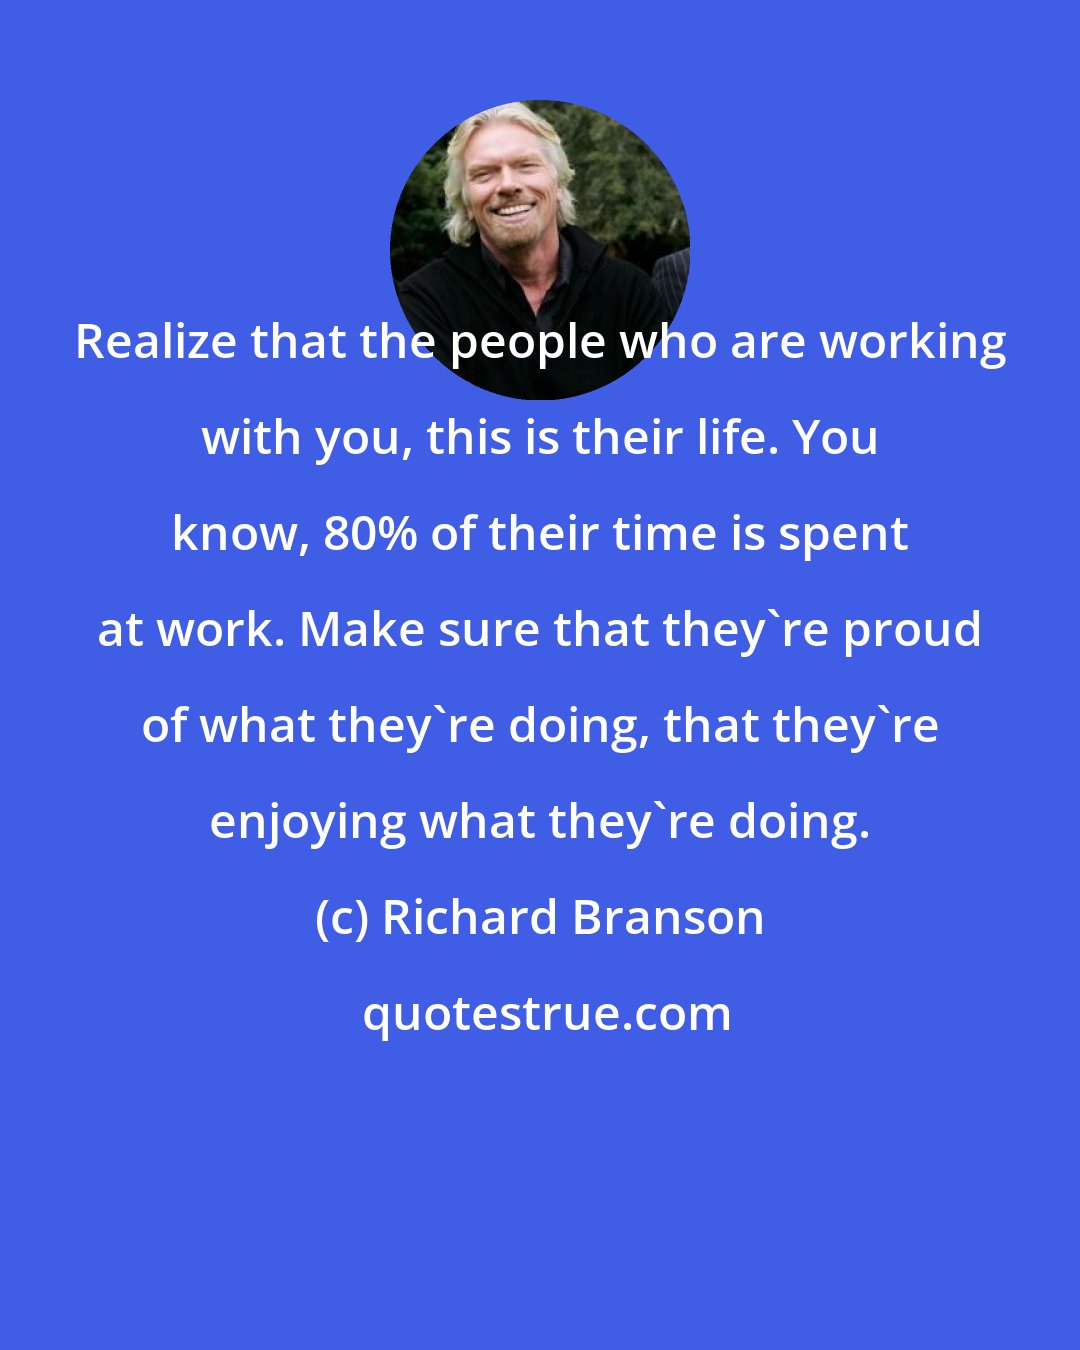 Richard Branson: Realize that the people who are working with you, this is their life. You know, 80% of their time is spent at work. Make sure that they're proud of what they're doing, that they're enjoying what they're doing.